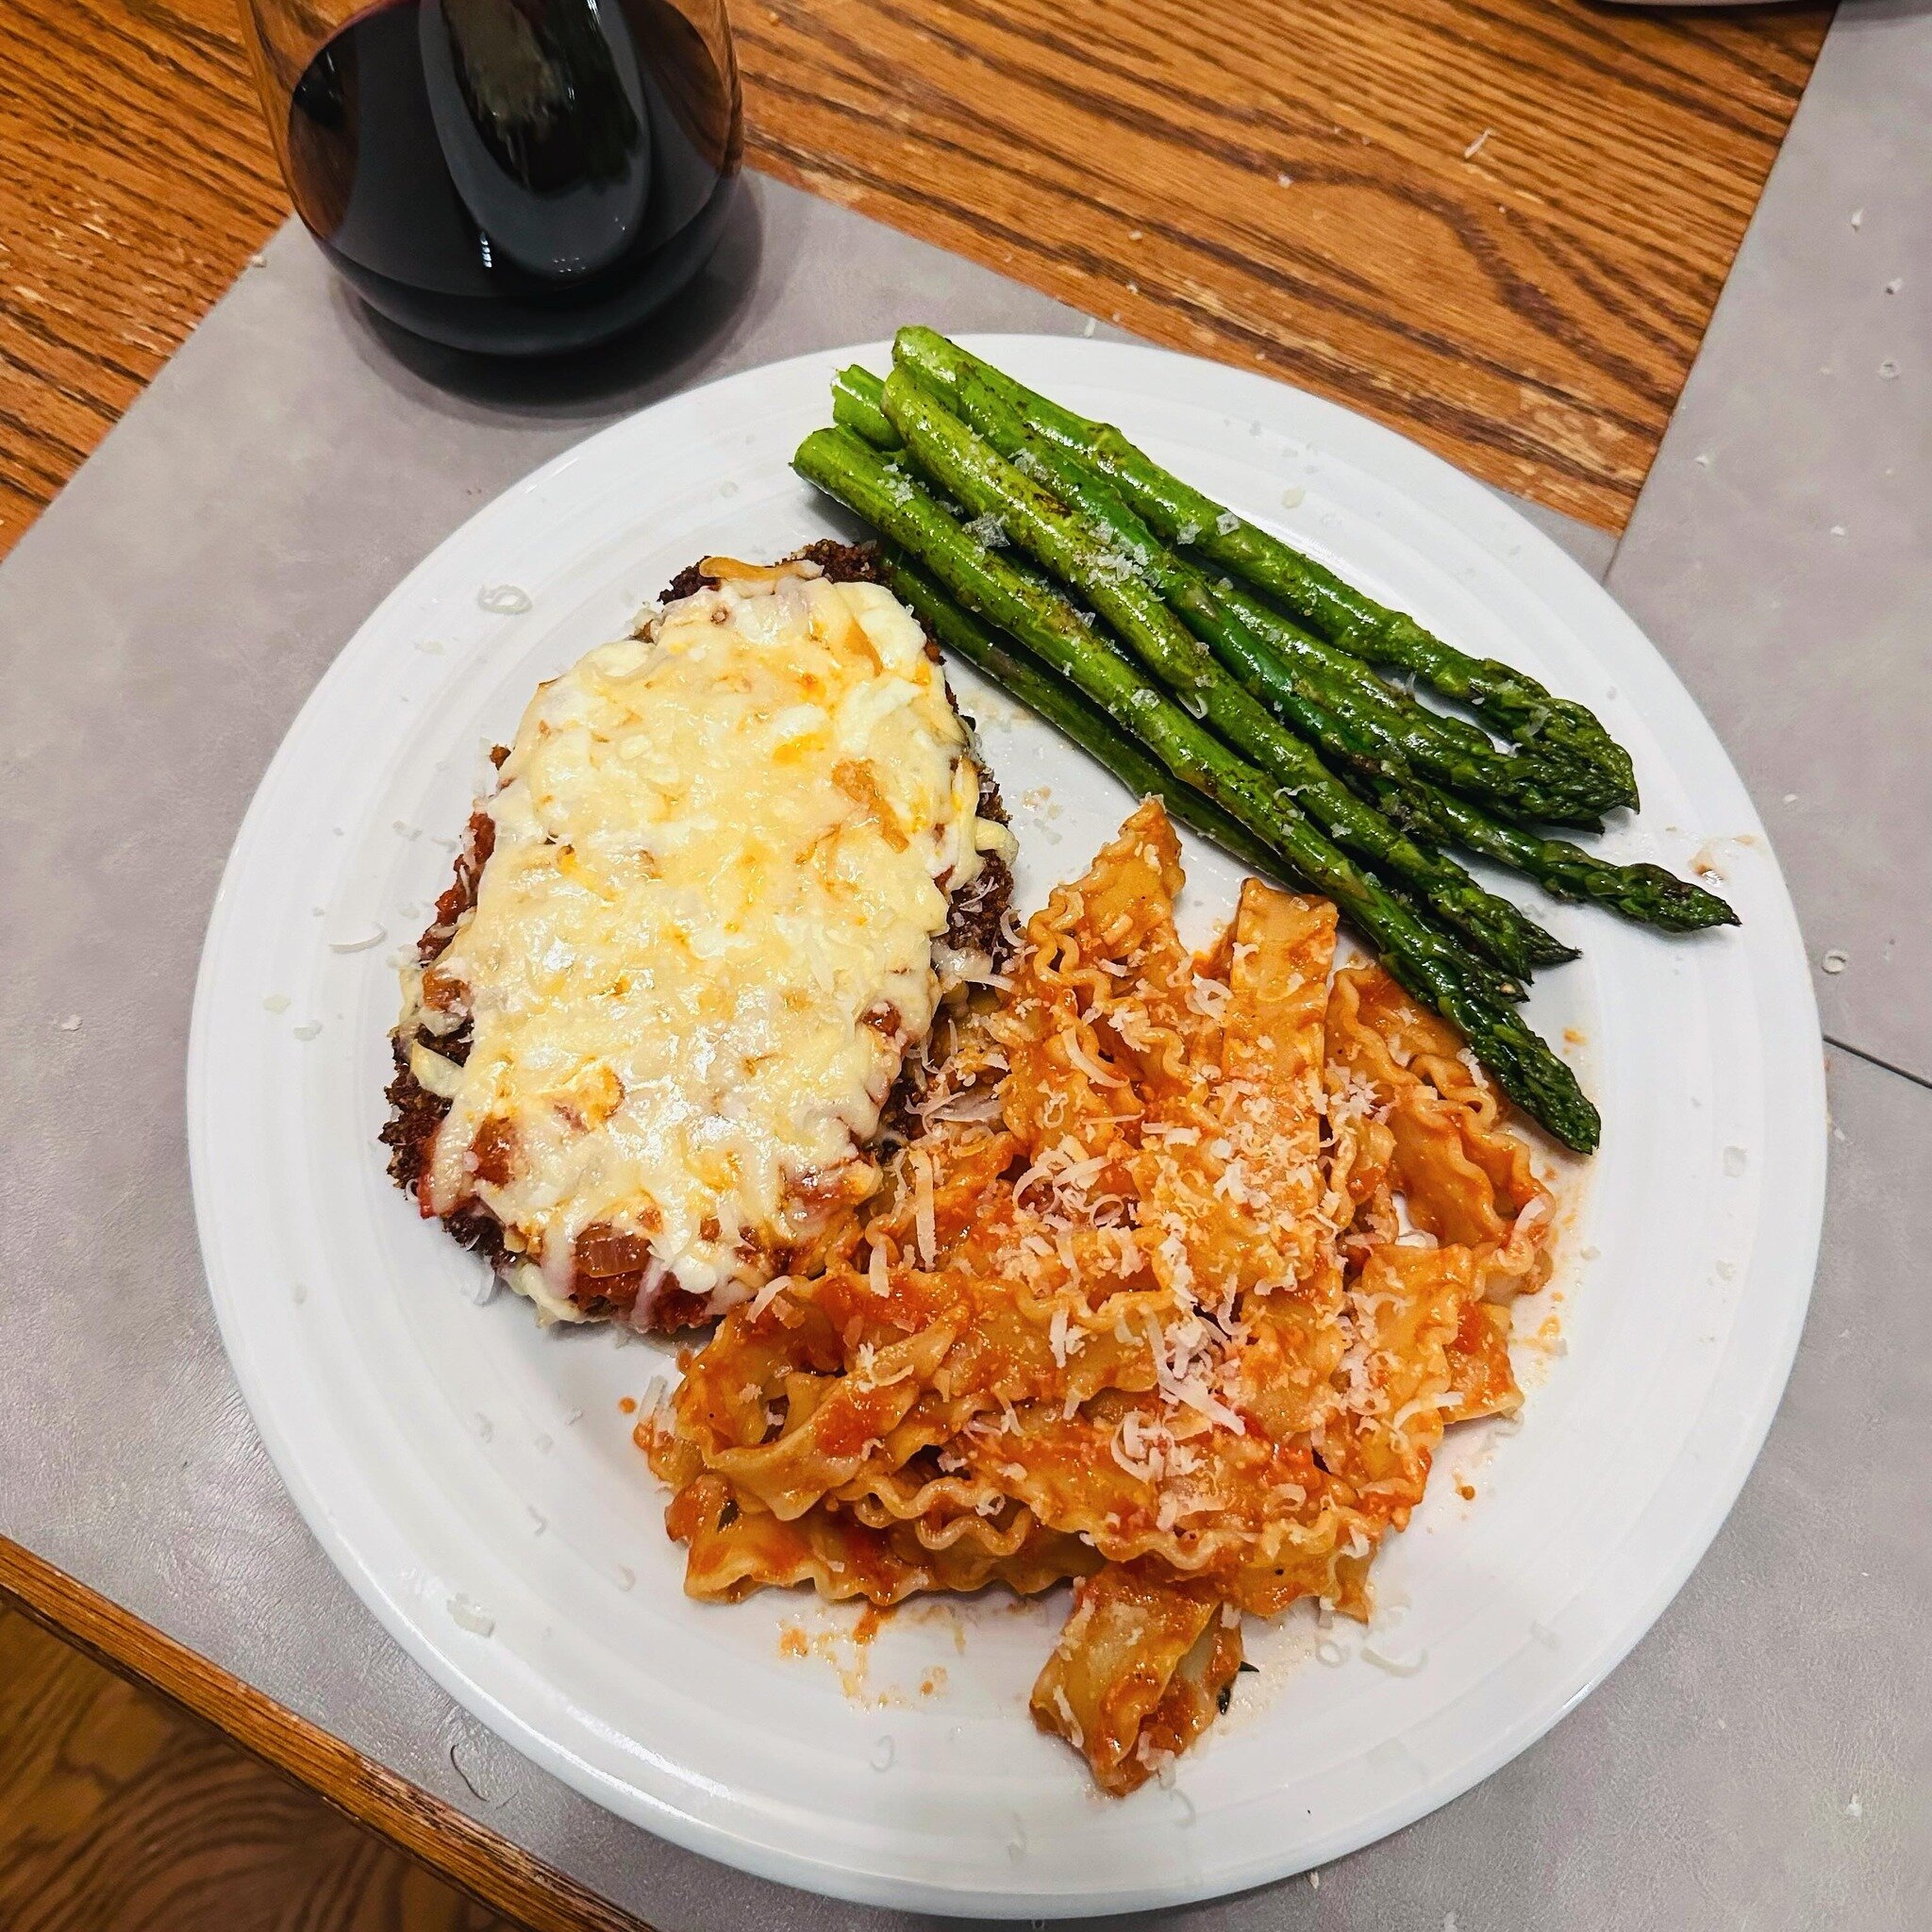 Chicken parmigiana with balsamic asparagus. Made with love.